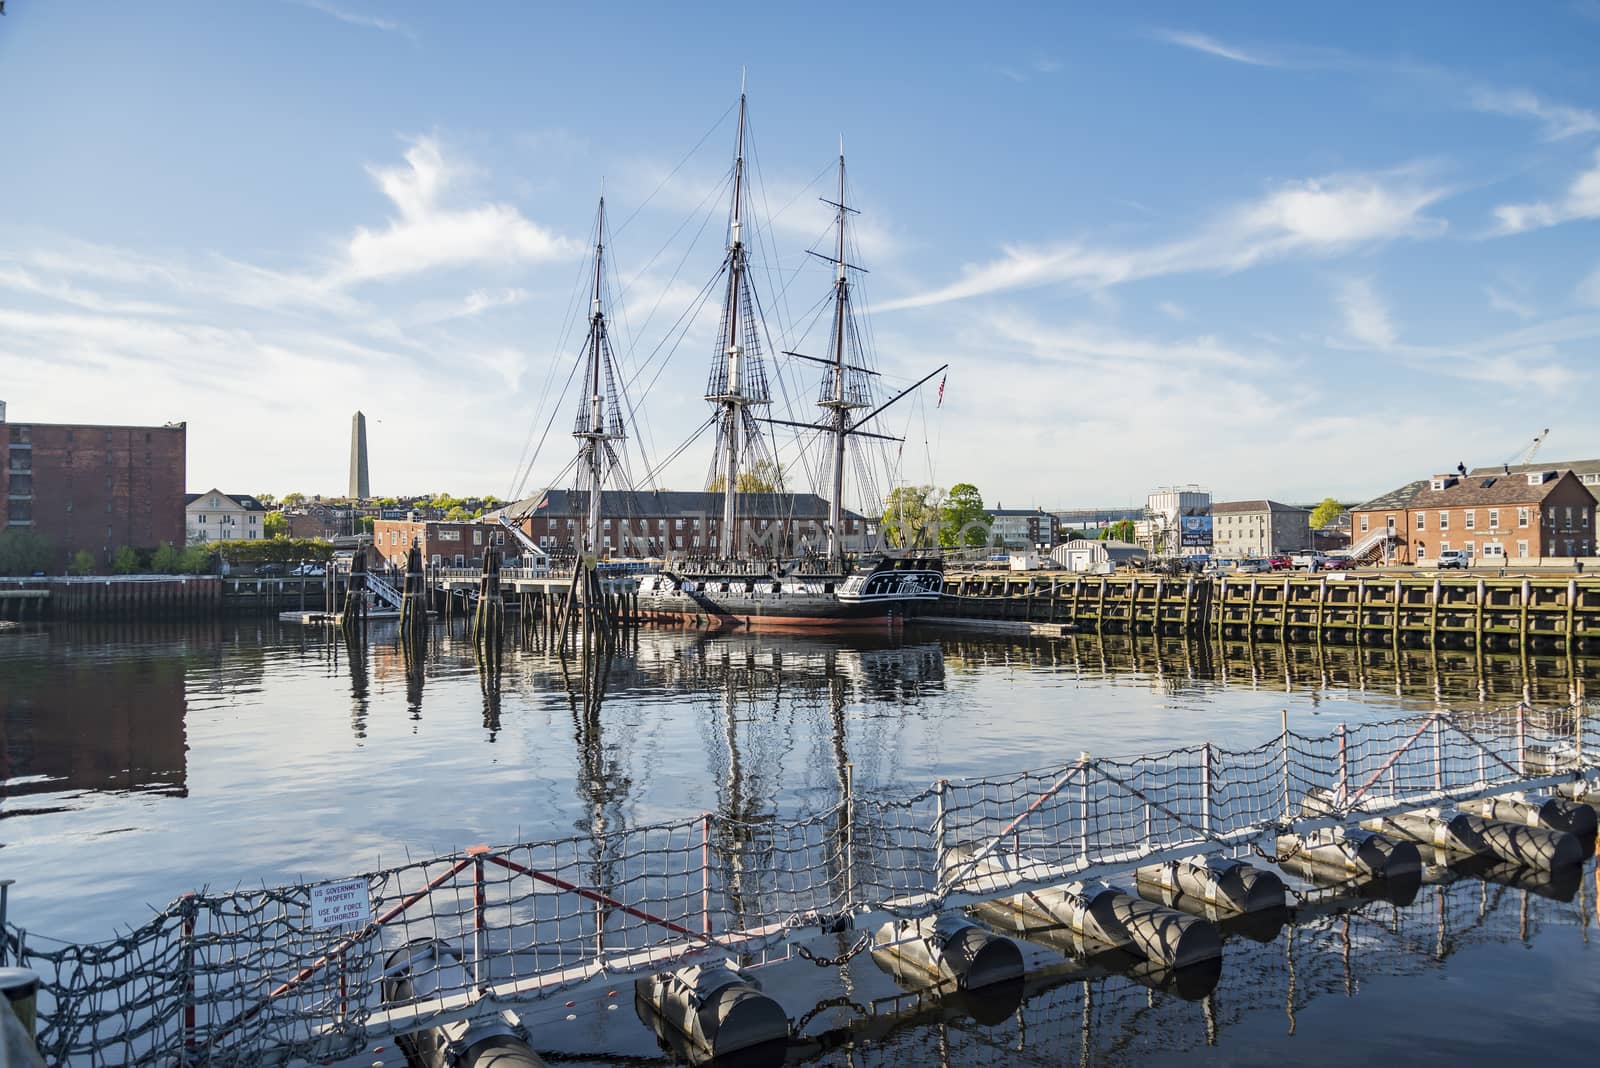 The historical USS Constitution boat anchored in the Boston harbor, MA.